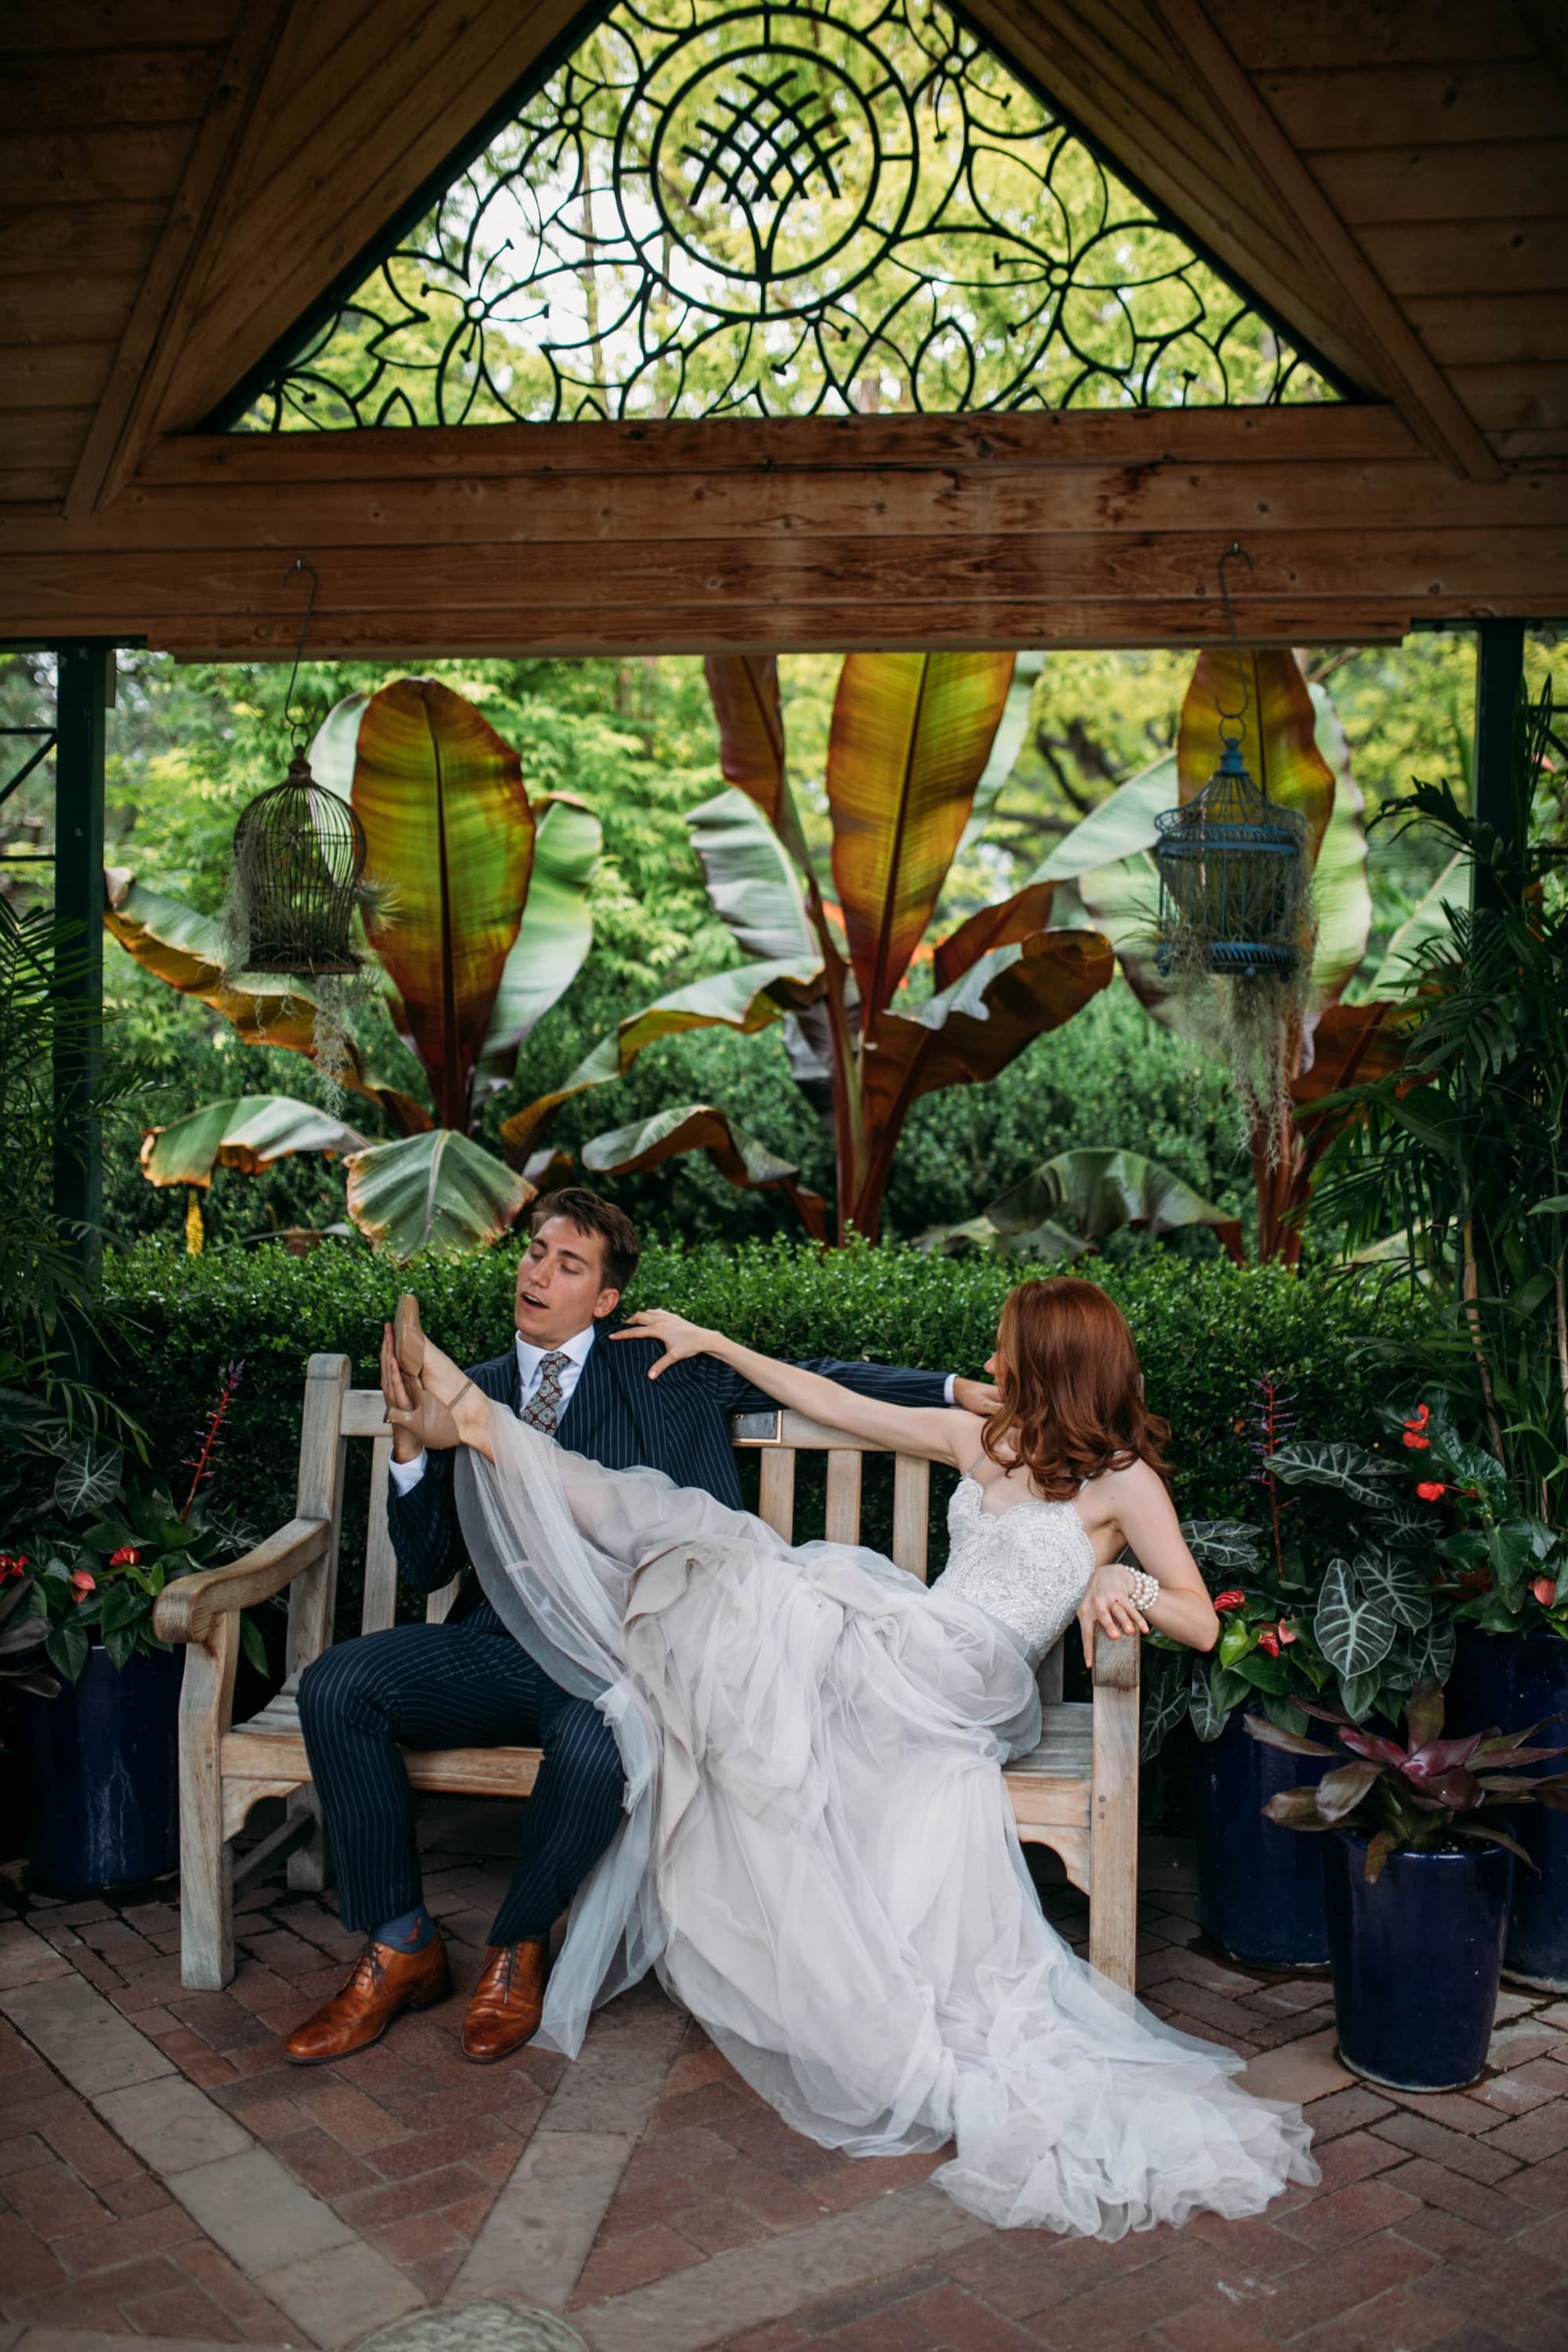 fun bride and groom photos, getting married at botanic gardens, getting married in colorado, colorado venues, garden venue, fun bride and groom